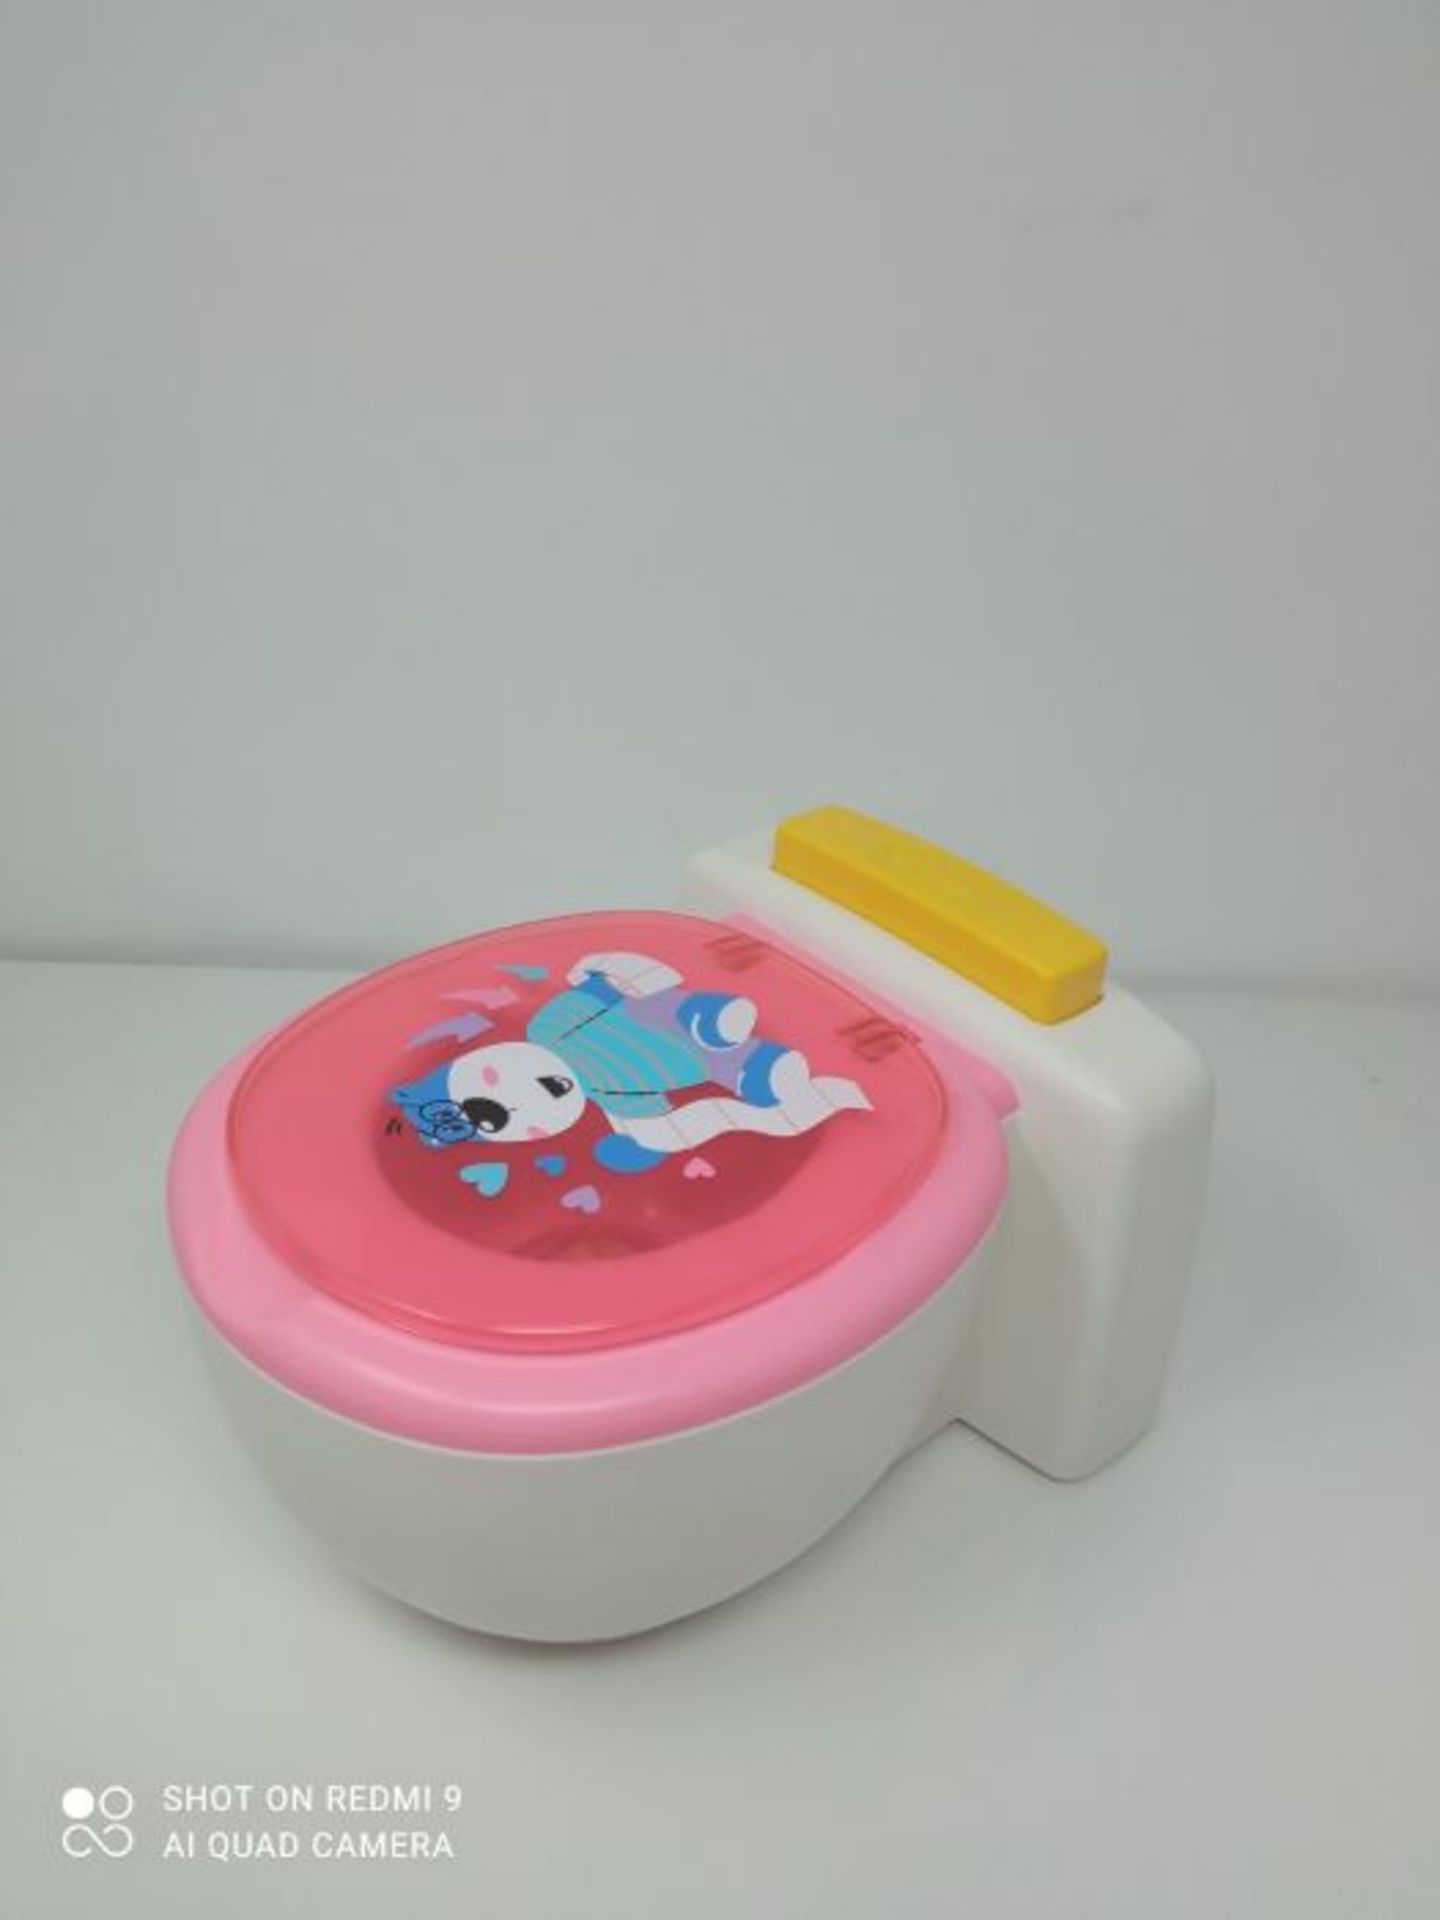 BABY born Bath Poo-Poo Toilet - Real Sound Effects - For Small Hands - Rainbow Glitter - Image 2 of 2